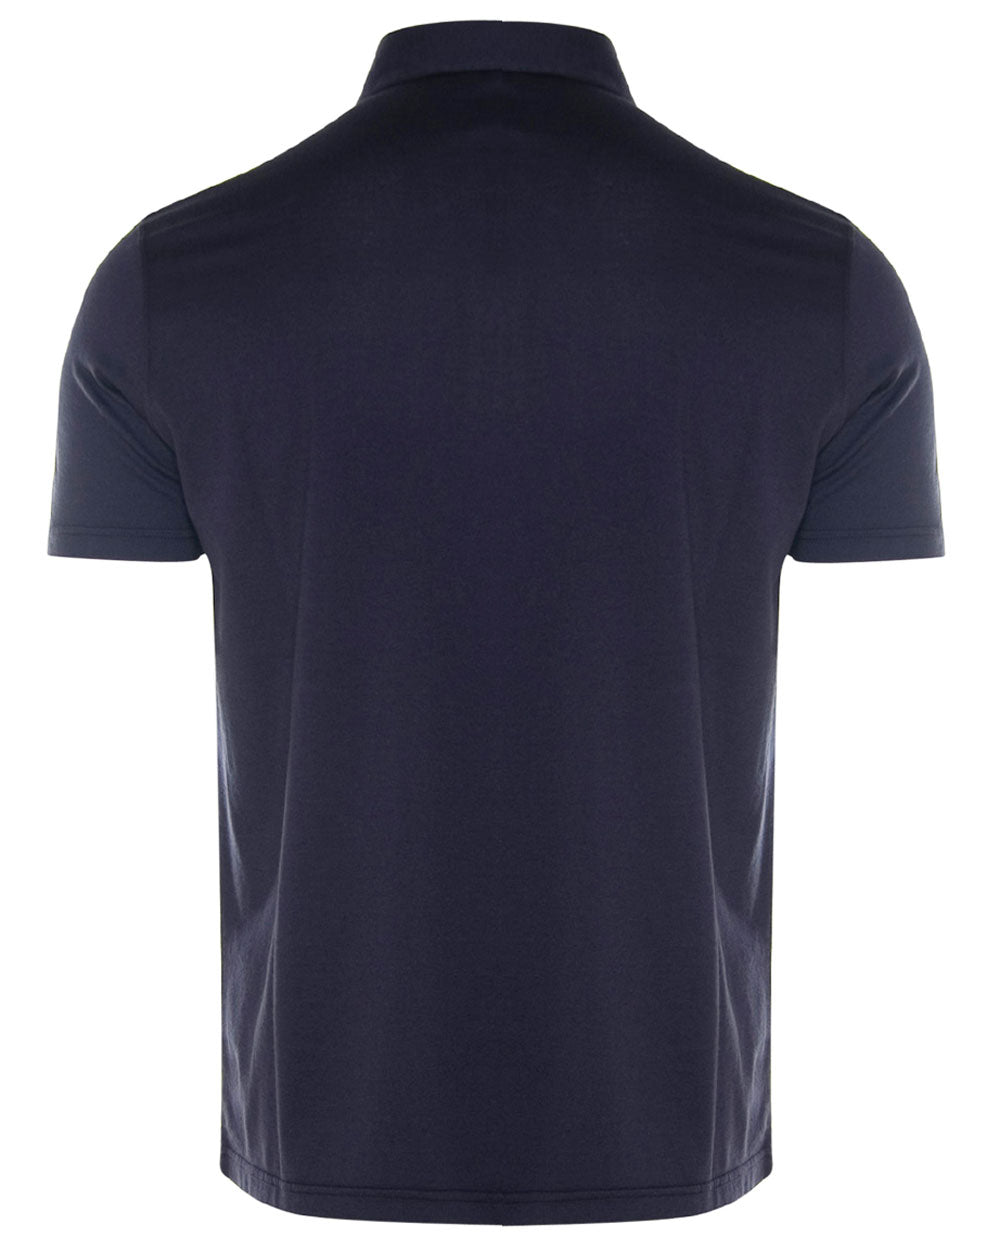 Navy Blue Cotton and Cashmere Polo